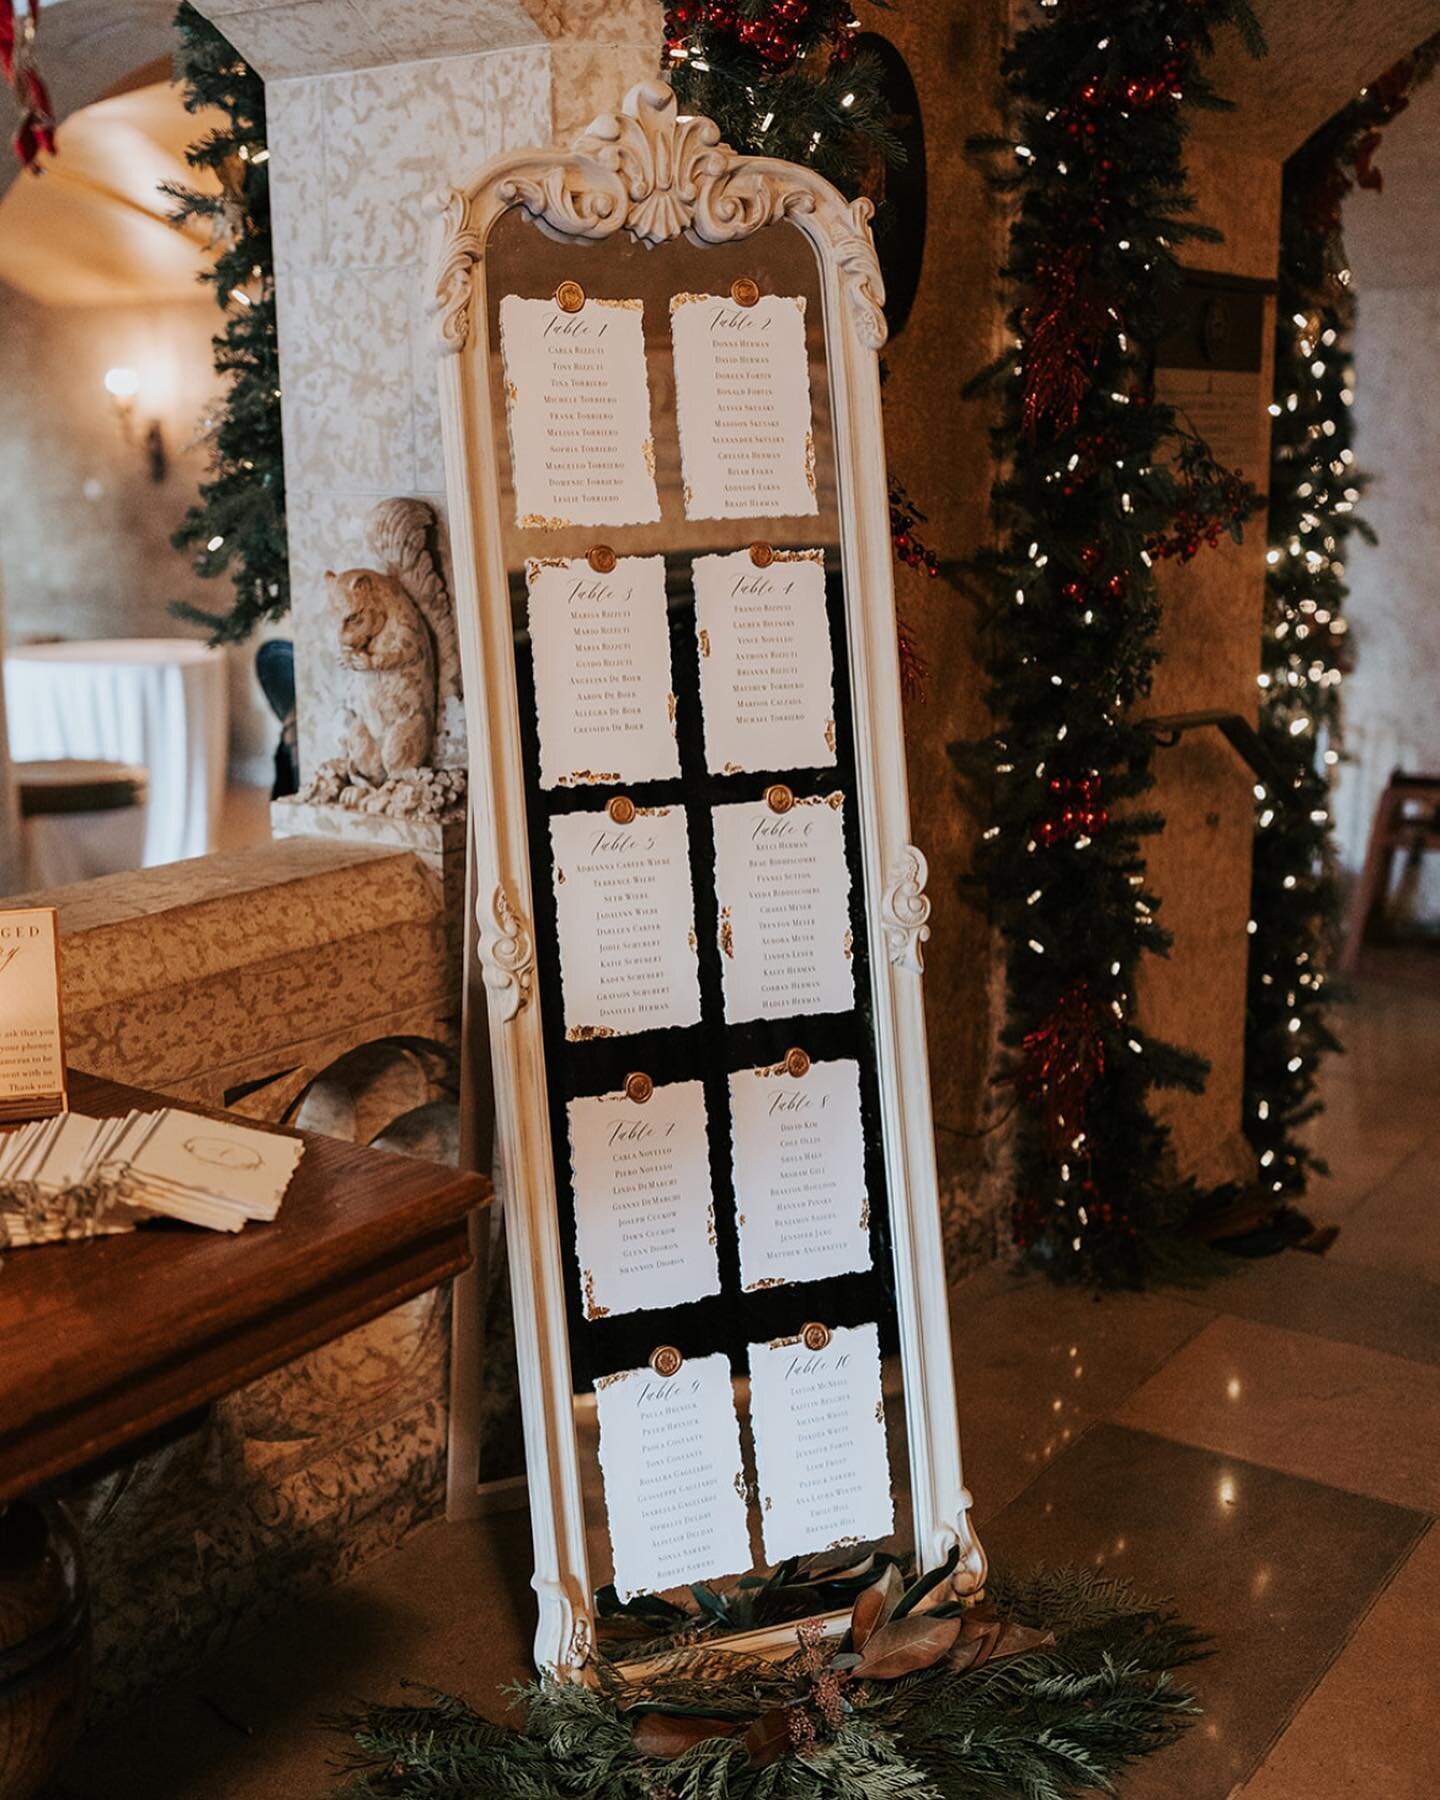 Seating chart display from the most magical day back in December 🤍❄️

Photography: @alyssawrightphoto 
Planning: @coco_ash_events 

I&rsquo;m now taking bookings for 2023, inquire via the website link in my bio. 
.
.
.
.
.
 #weddingpaper #weddinginv